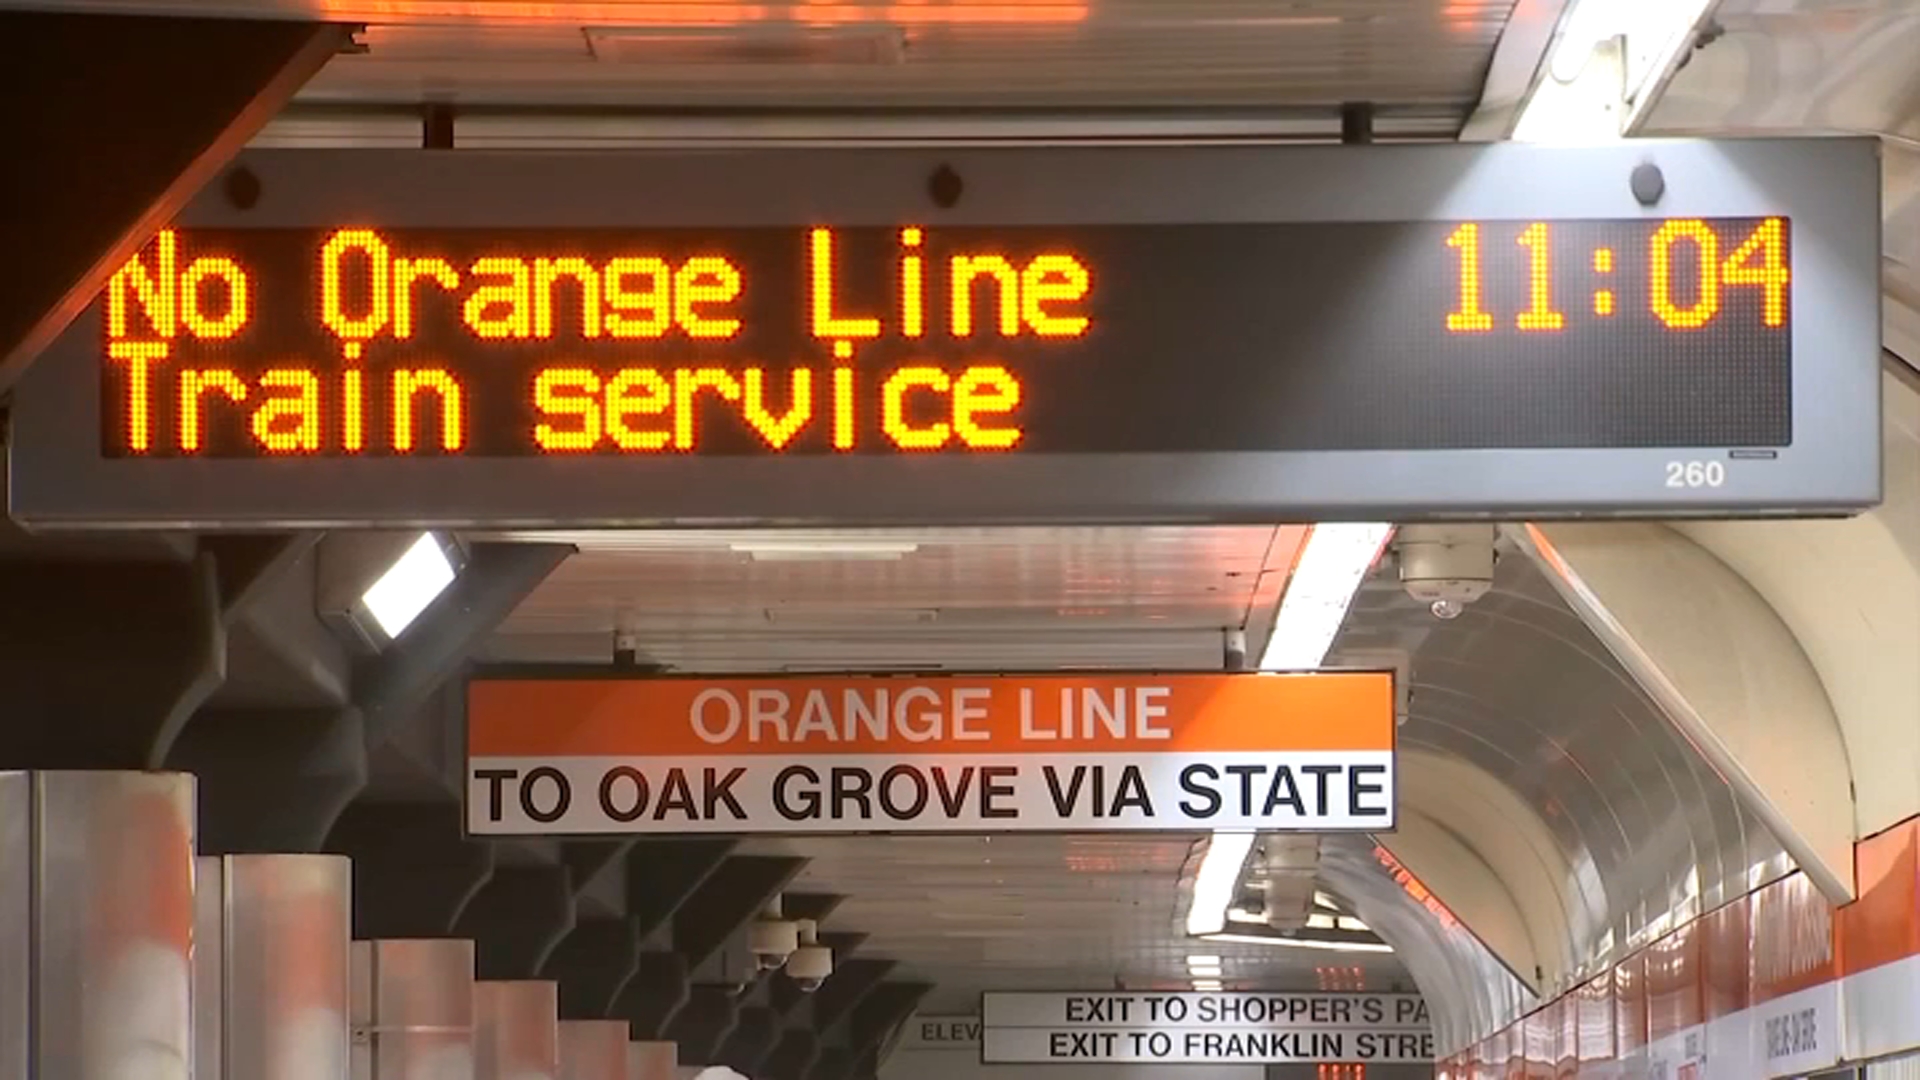 No Orange Line service, use your helicopter': Fake MBTA signs spring up in  Boston during train shutdown 